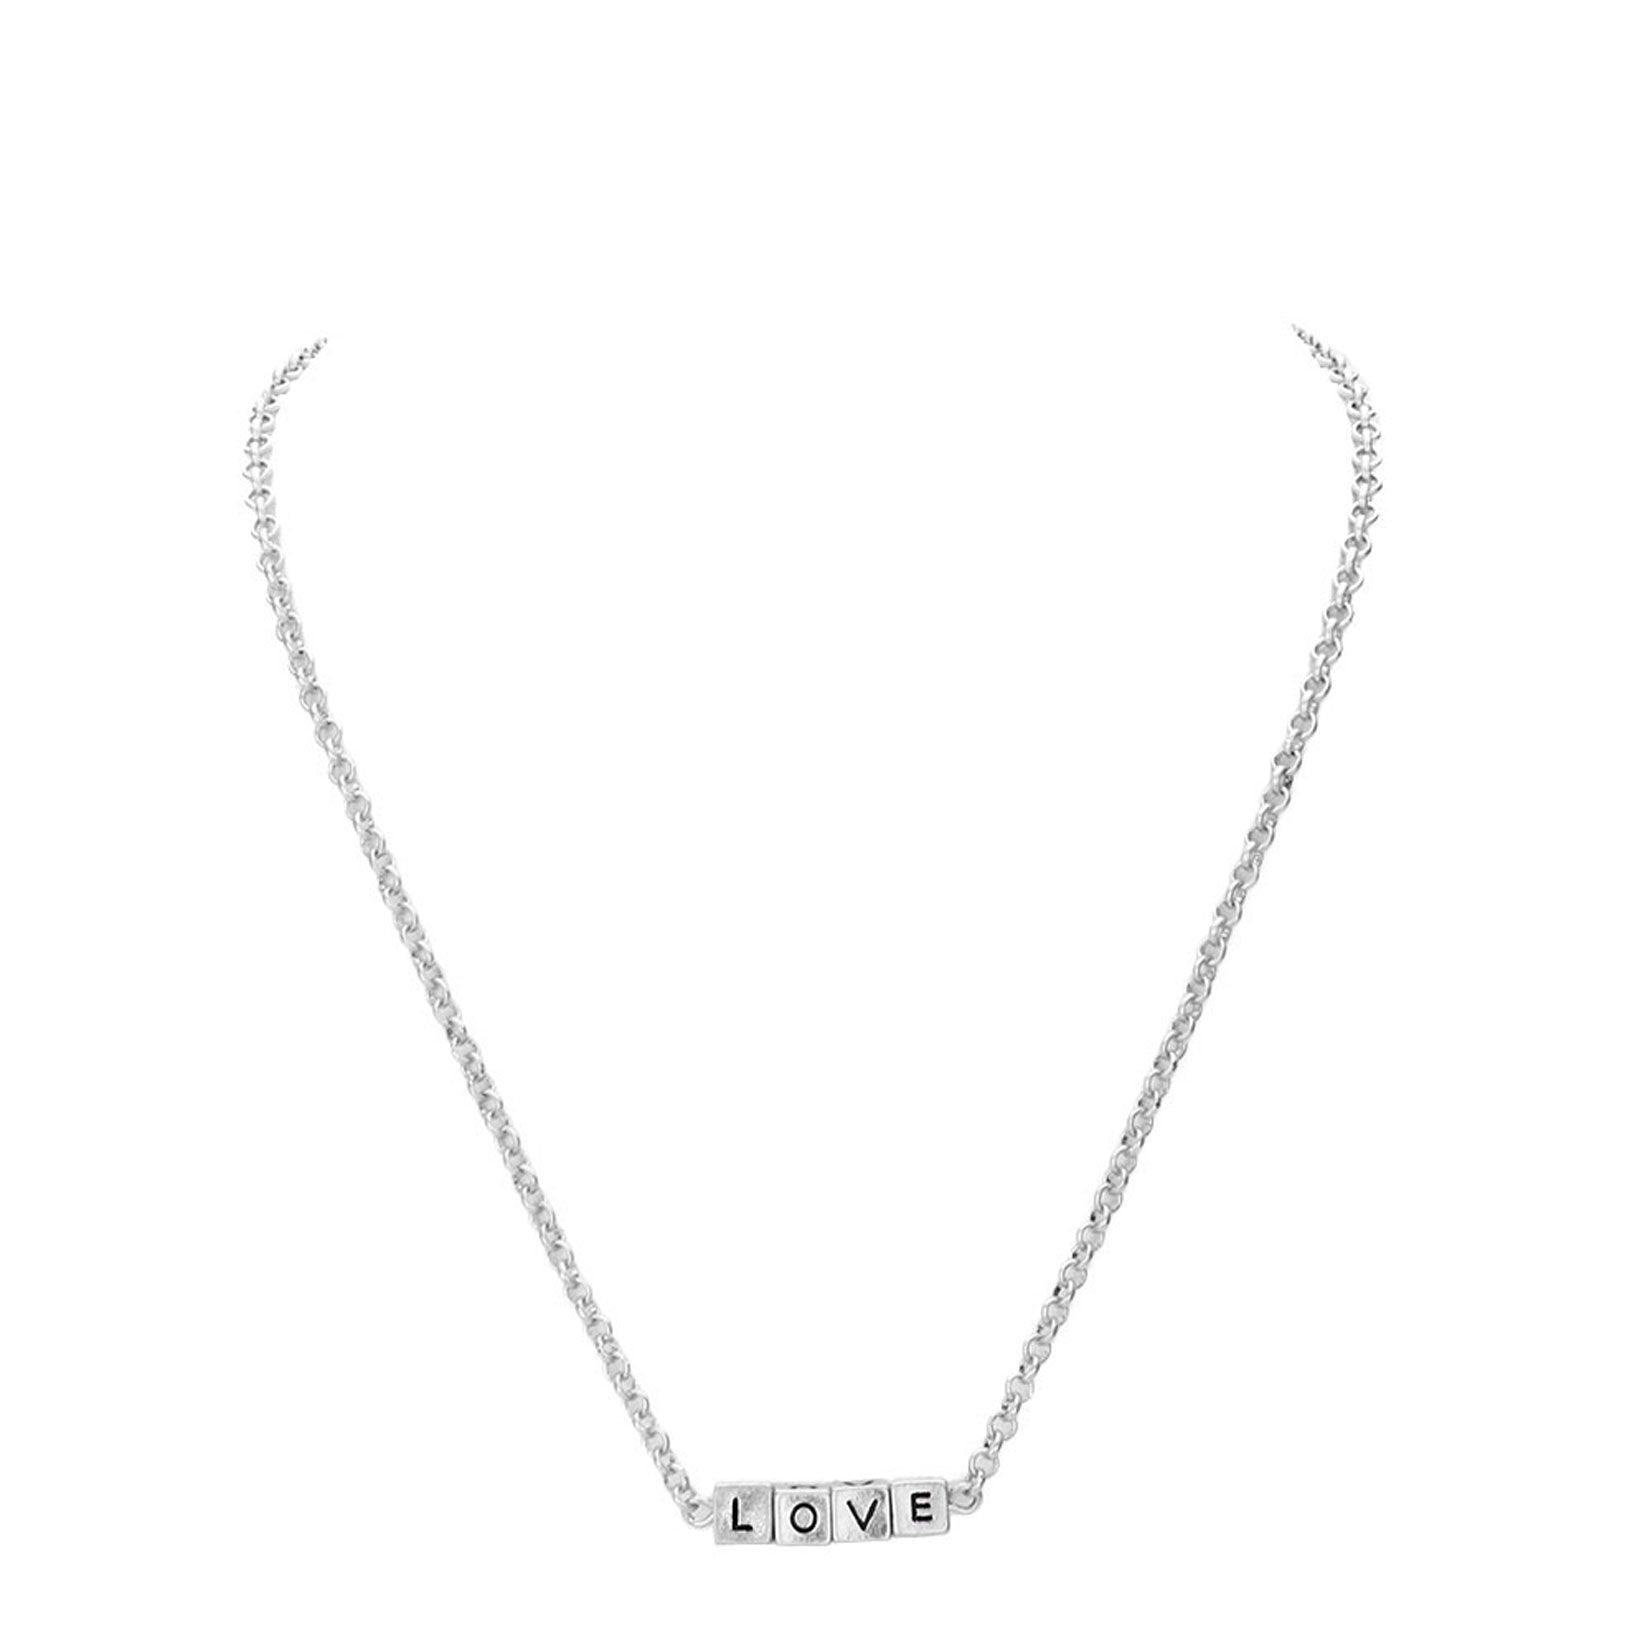 Rhodium LOVE Metal Cube Pendant Necklace, Get ready with these Pendant Necklace, put on a pop of color to complete your ensemble. Perfect for adding just the right amount of shimmer & shine and a touch of class to special events. Perfect Birthday Gift, Anniversary Gift, Mother's Day Gift, Valentine's Day Gift.